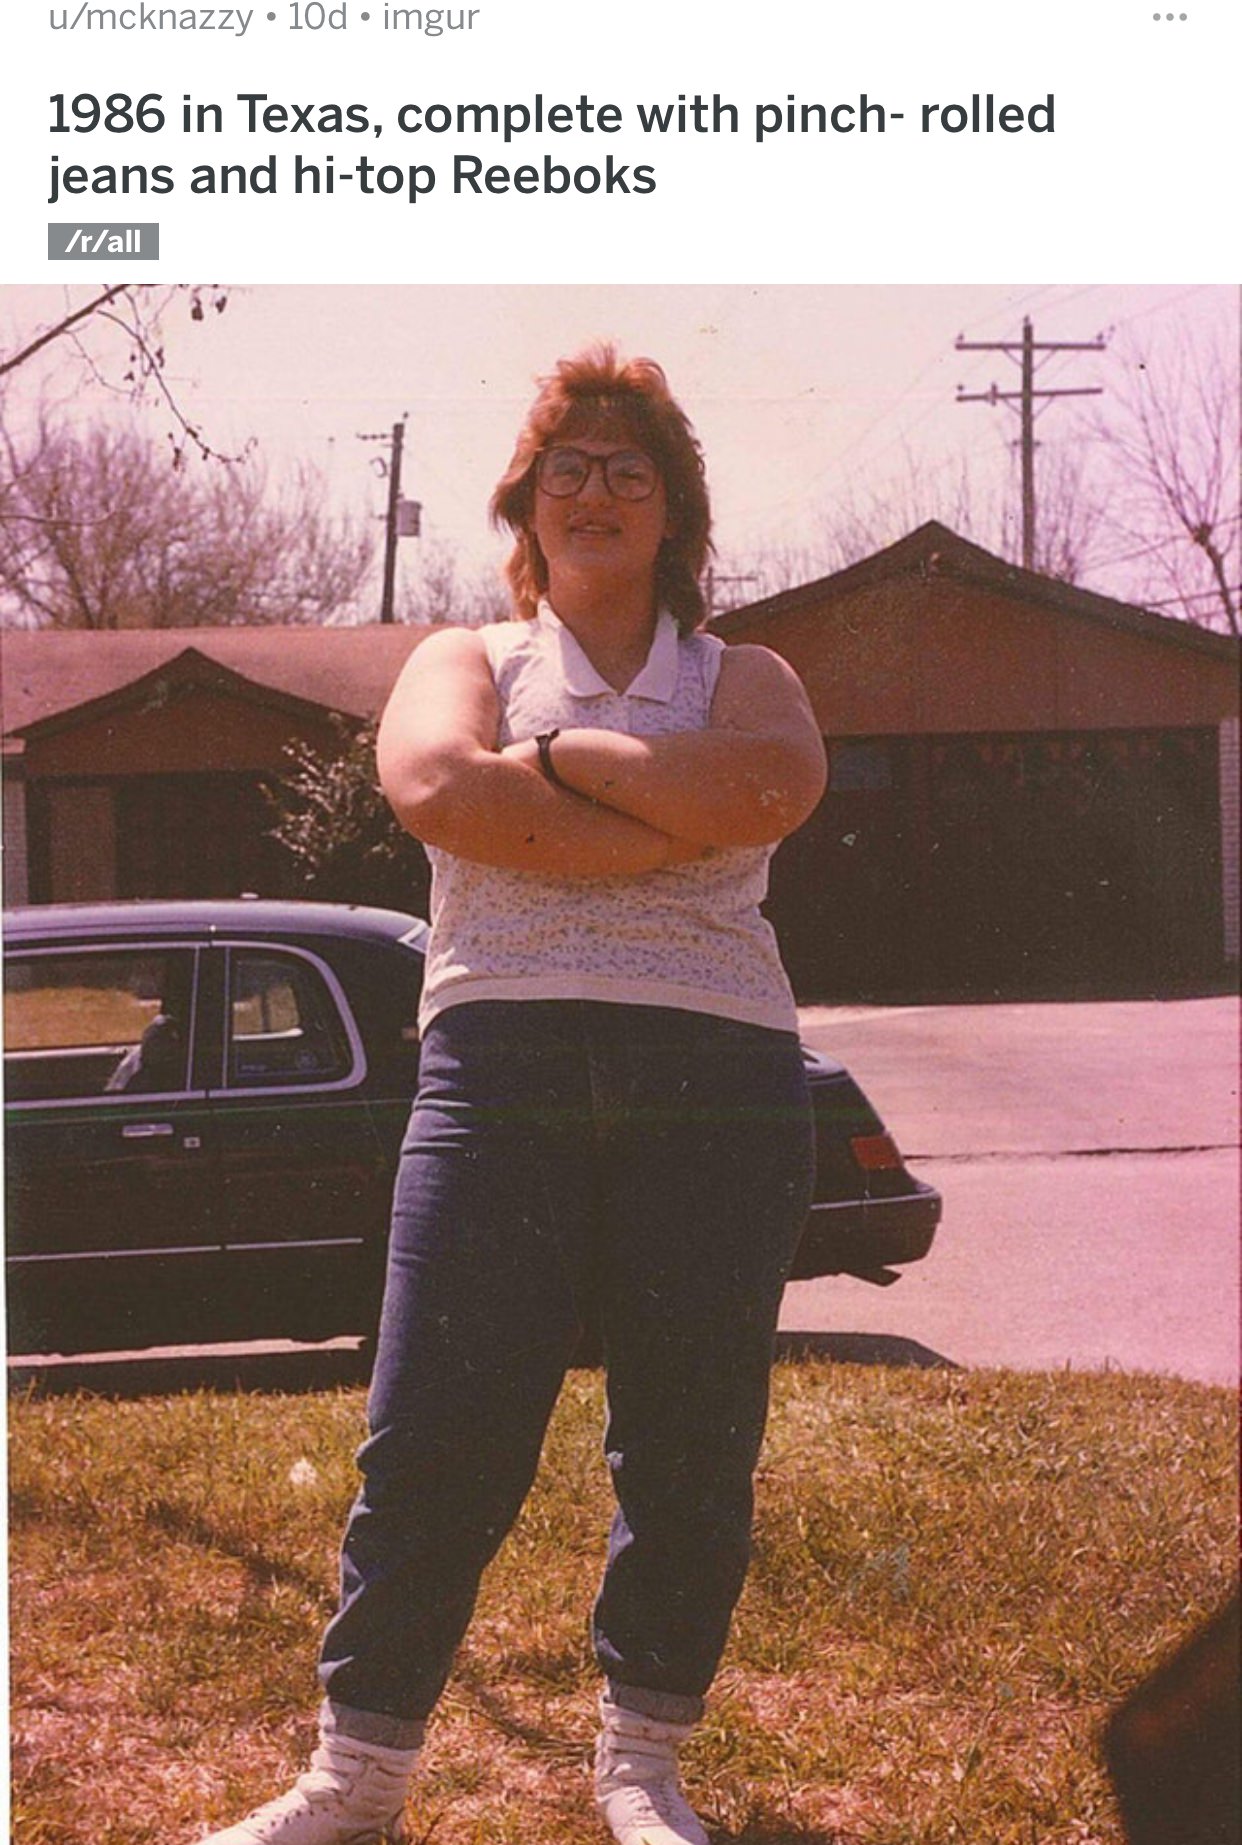 photograph - umcknazzy 10d imgur 1986 in Texas, complete with pinch rolled jeans and hitop Reeboks rall